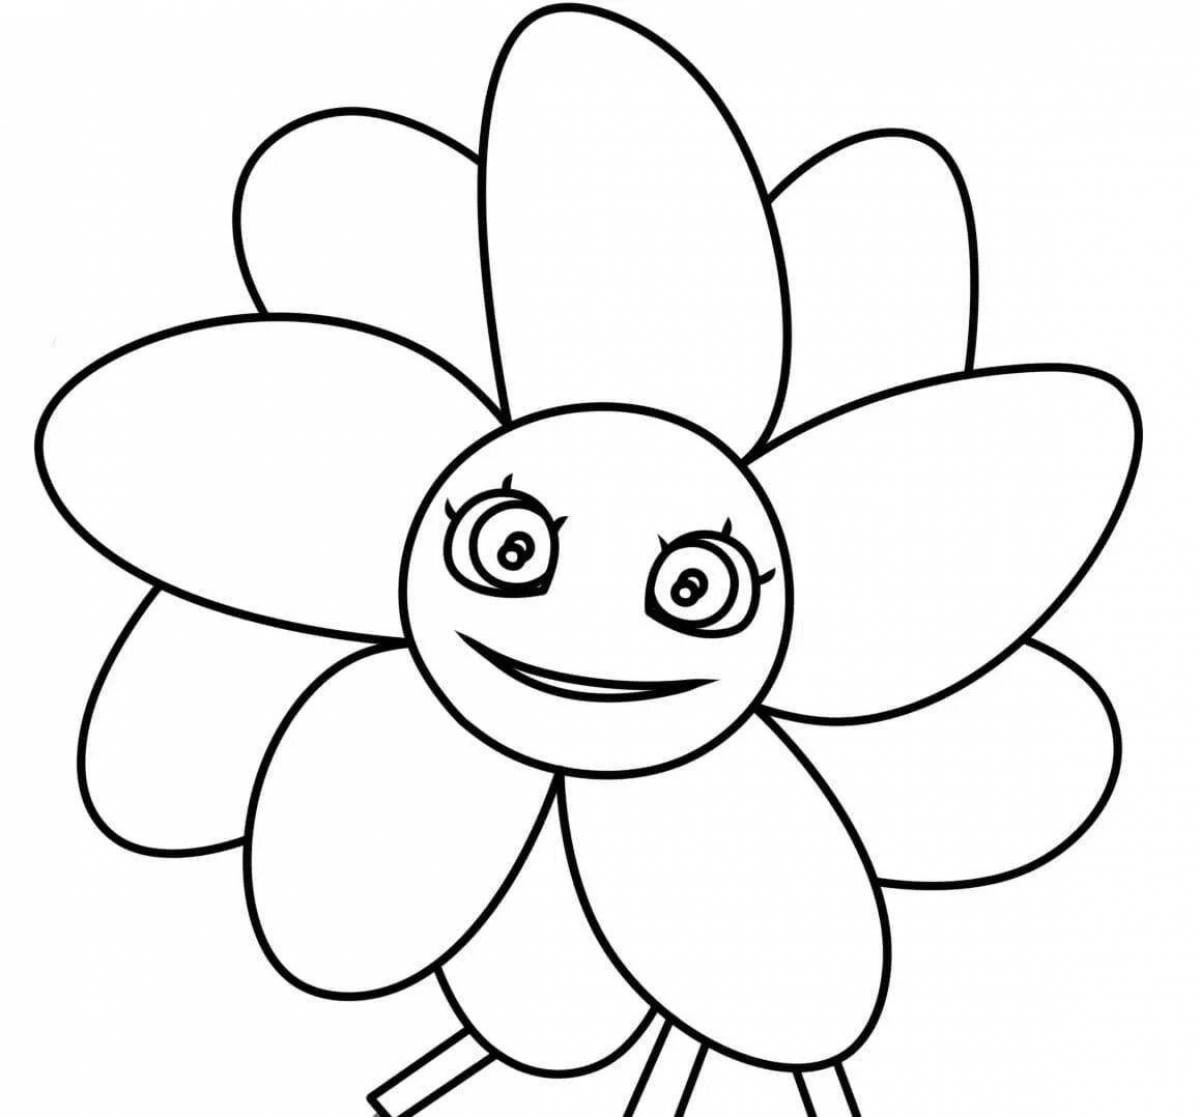 Amazing daisy flower coloring page